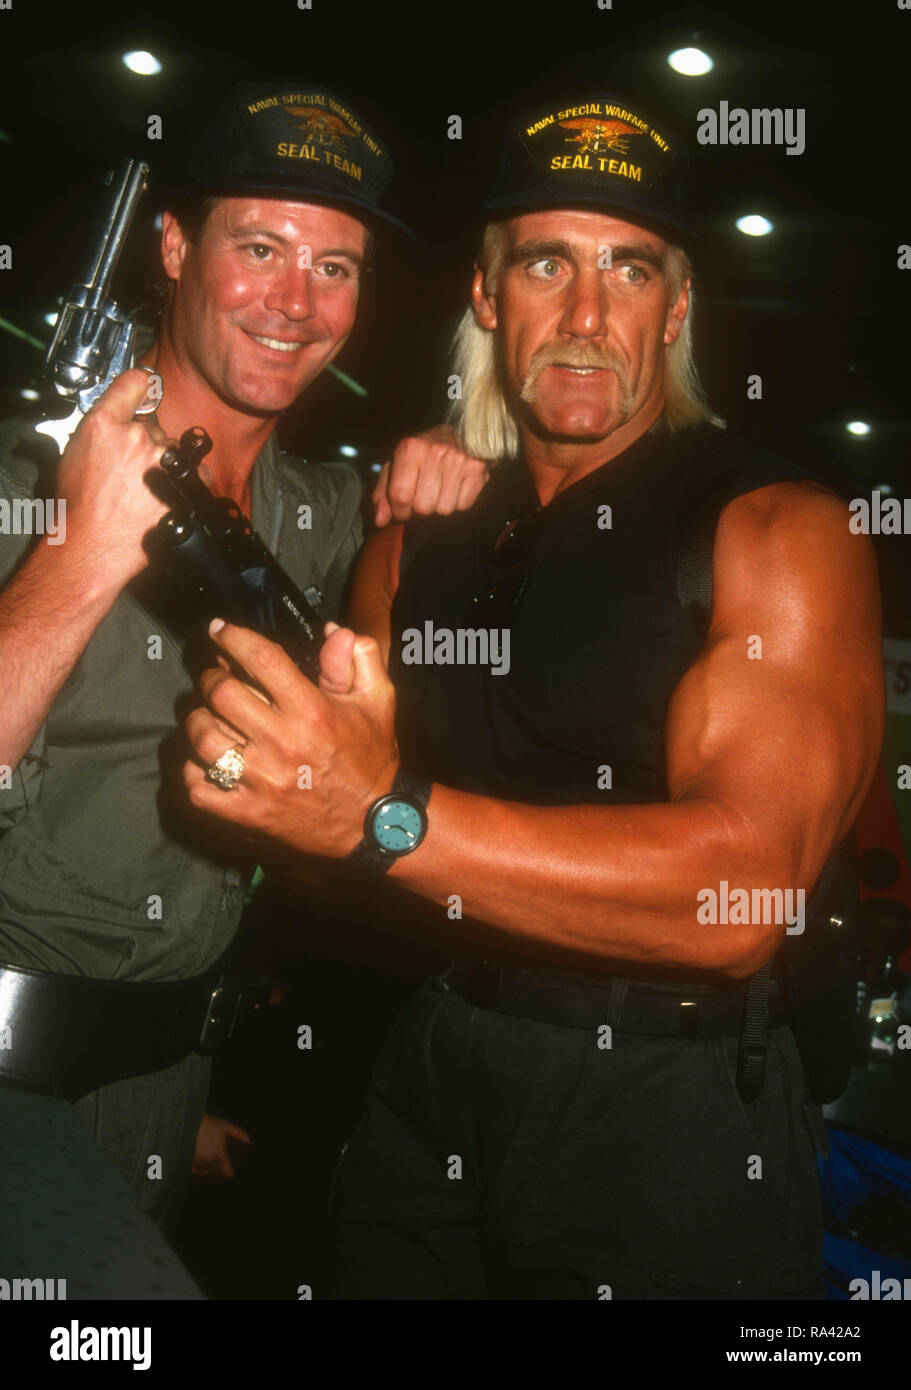 LAS VEGAS, NV - JULY 12: Actor Chris Lemmon and Wrestler Hulk Hogan, aka Terry Gene Bollea attends the 12th Annual Video Software Dealers Association (VSDA) Convention and Expo on July 12, 1993 at the Las Vegas Convention Center in Las Vegas, Nevada. Photo by Barry King/Alamy Stock Photo Stock Photo